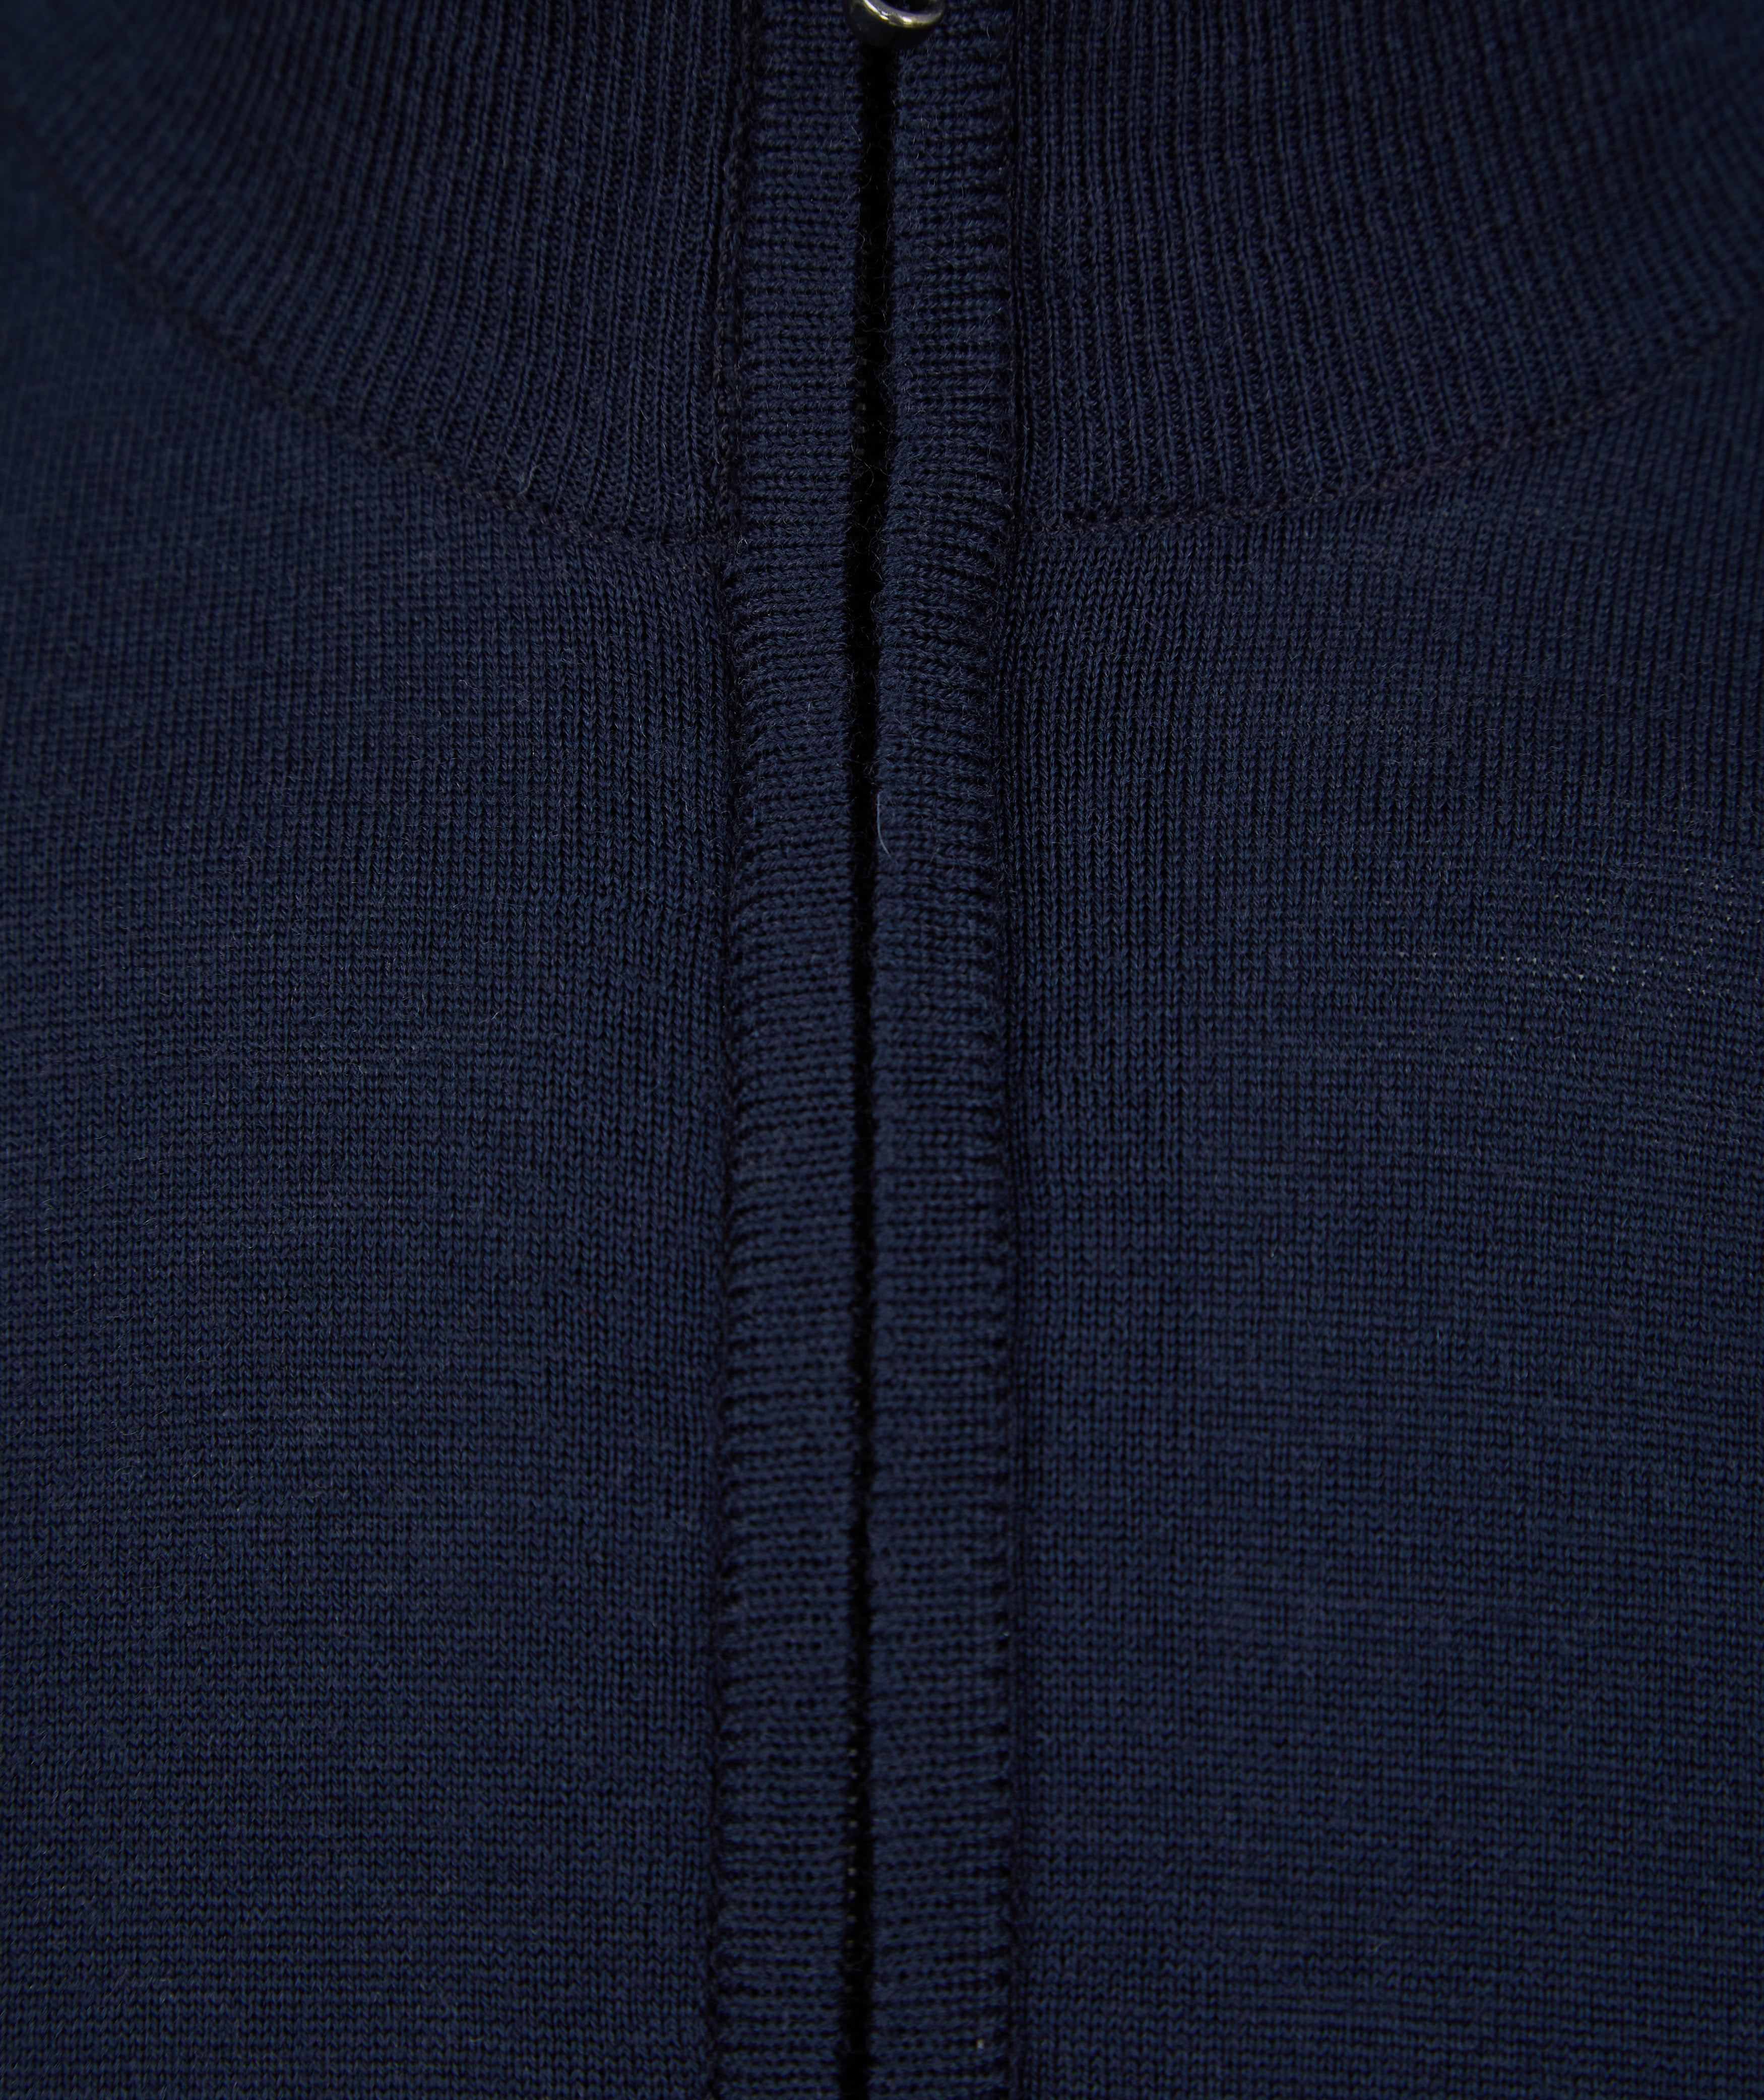 Load image into Gallery viewer, John Smedley Barrow Zip Knit Navy
